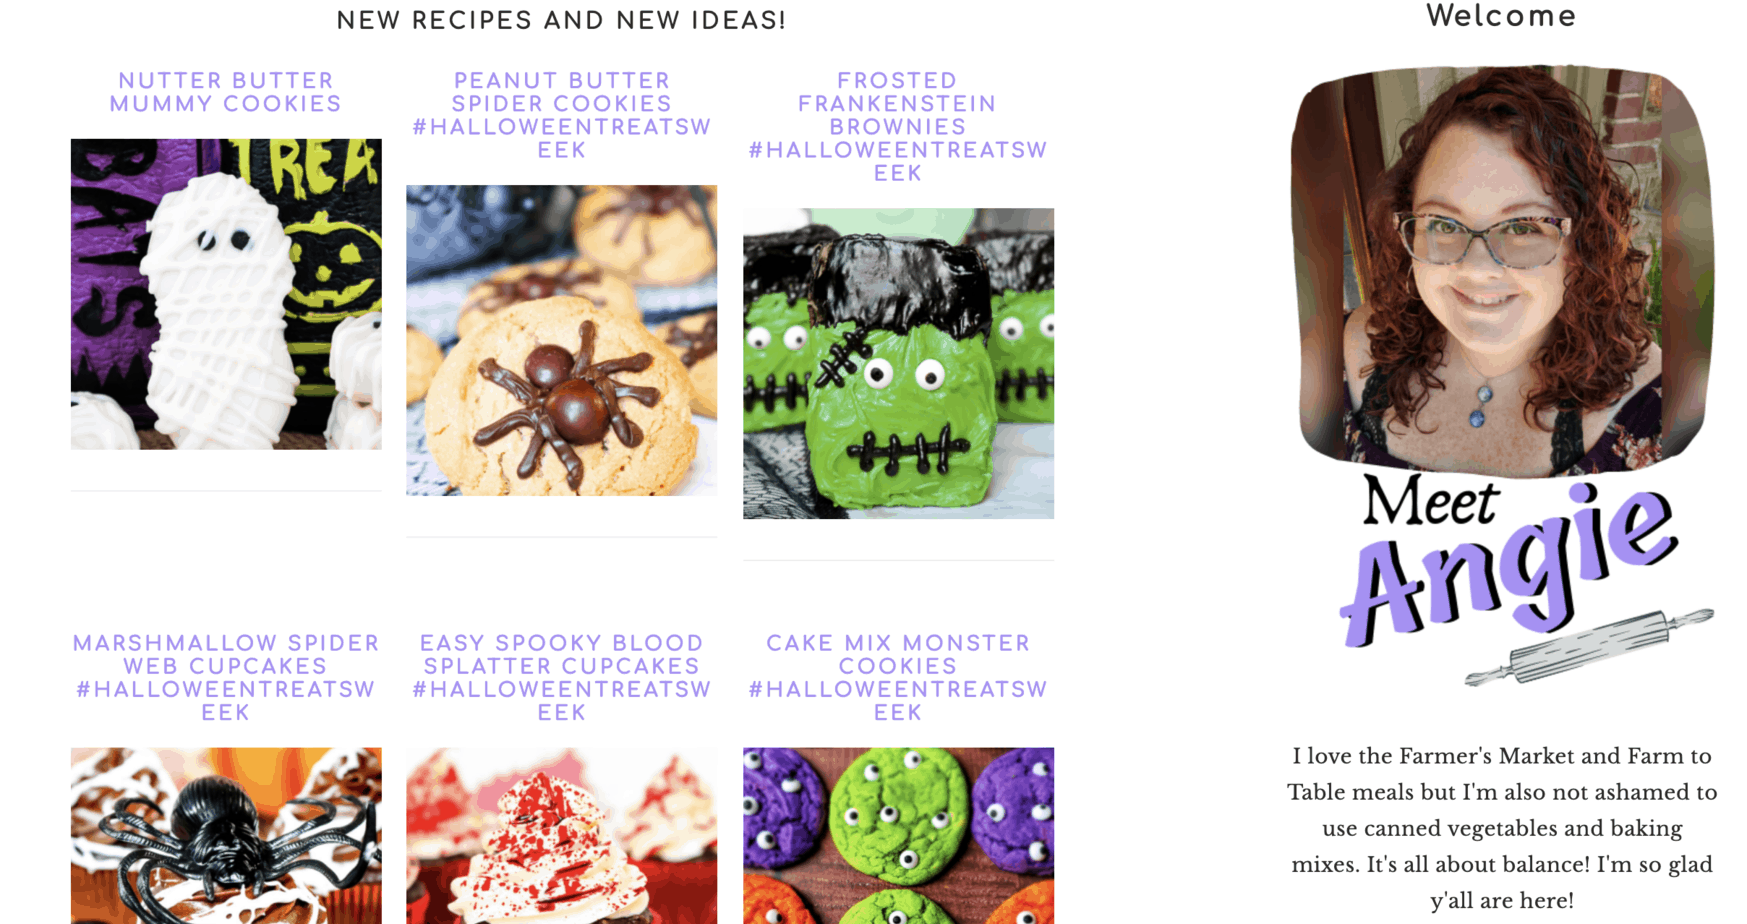 Halloween party ideas for tweens and Halloween recipe ideas from Angie at Big Bears Wife Blog. Nutty Butter Bookies, Peanut Butter Cookies, Frosted Brownies, Spiderweb Cupcakes, Spooky blood splatter Cupcakes, Monster Cookies.